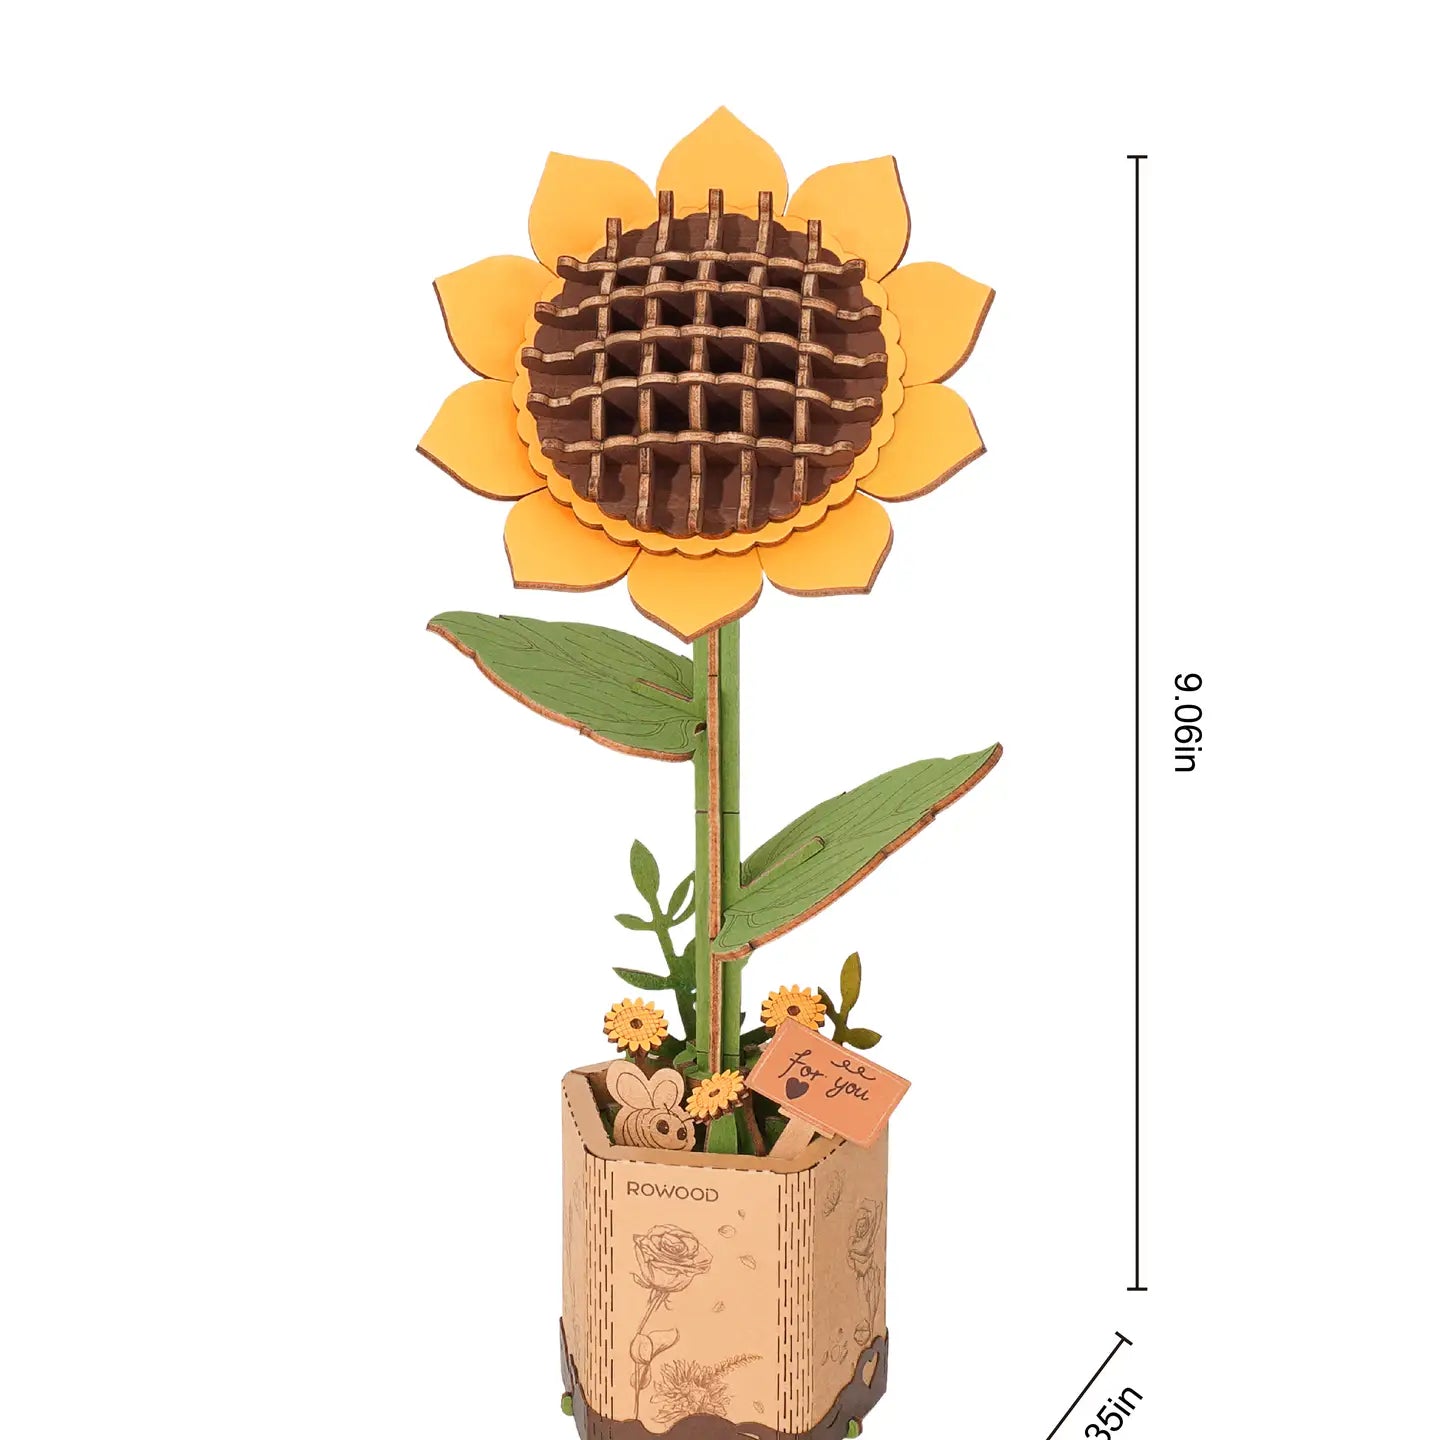 Wooden sunflower 3D puzzle kit with intricate lattice design, perfect for DIY crafting and home decor. Ideal gift for DIY enthusiasts. Dimensions: 5.9 x 5.3 x 2.1 in.